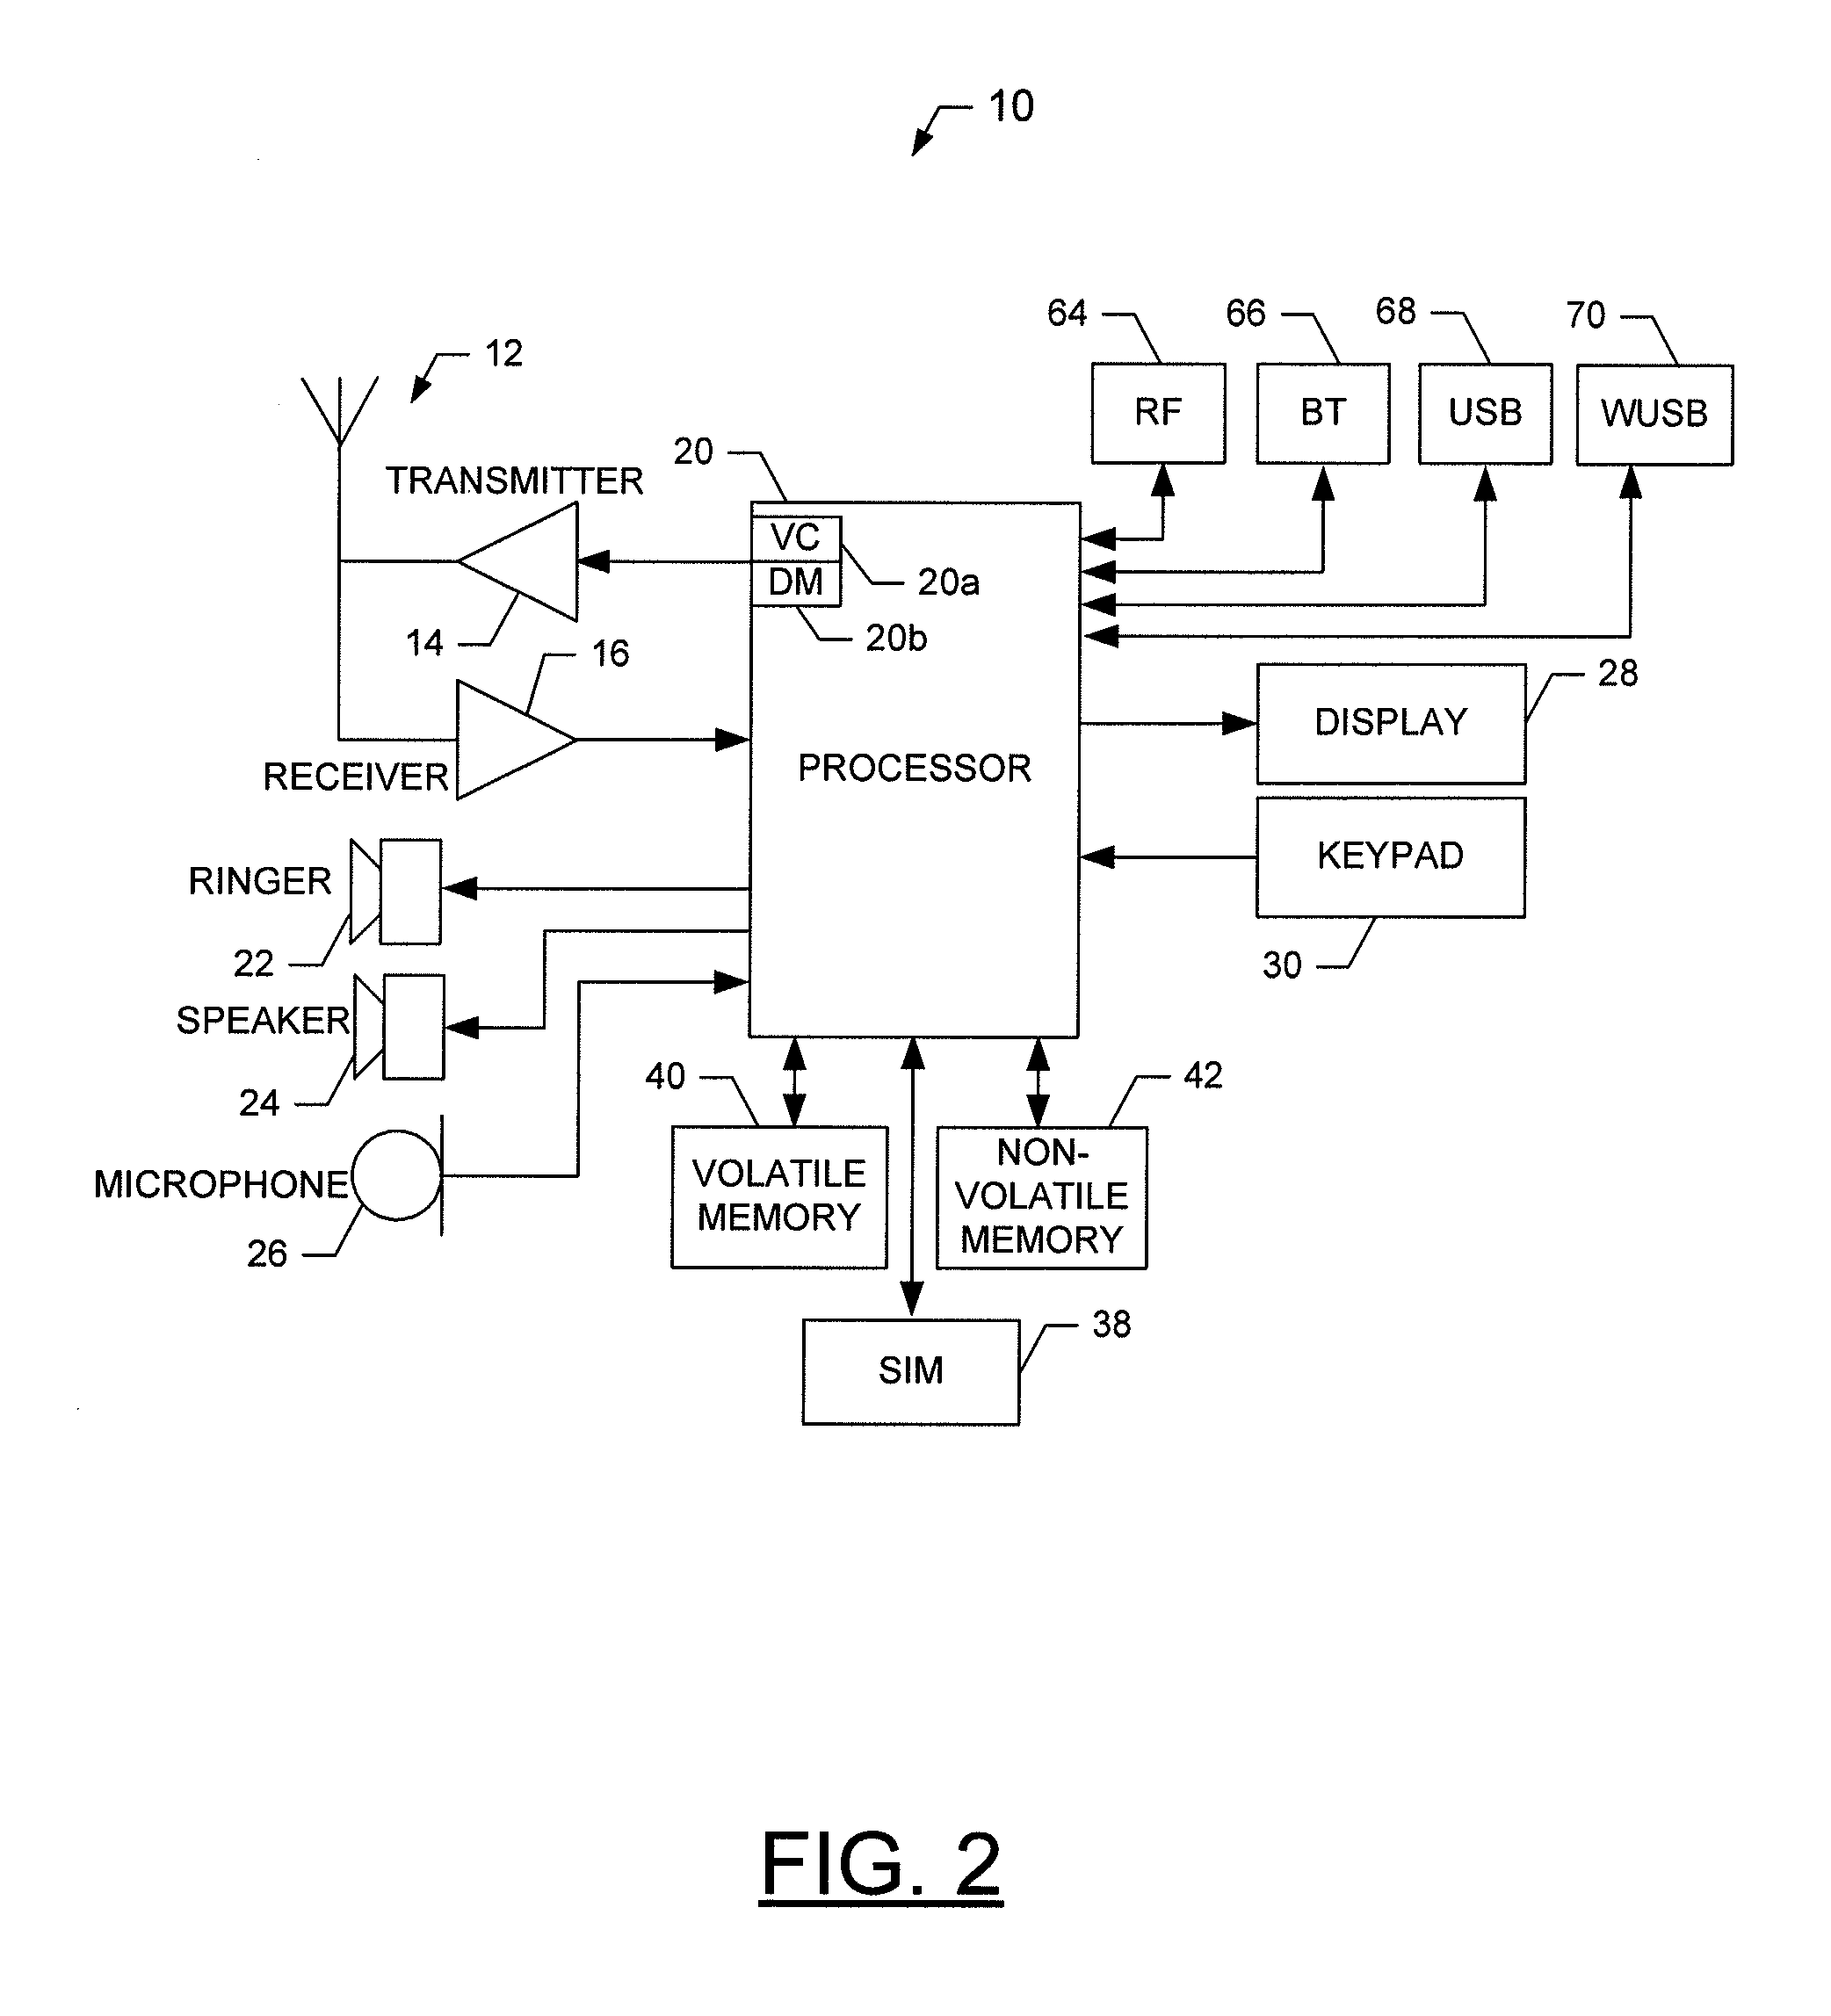 Methods and apparatuses for facilitating sharing device connections